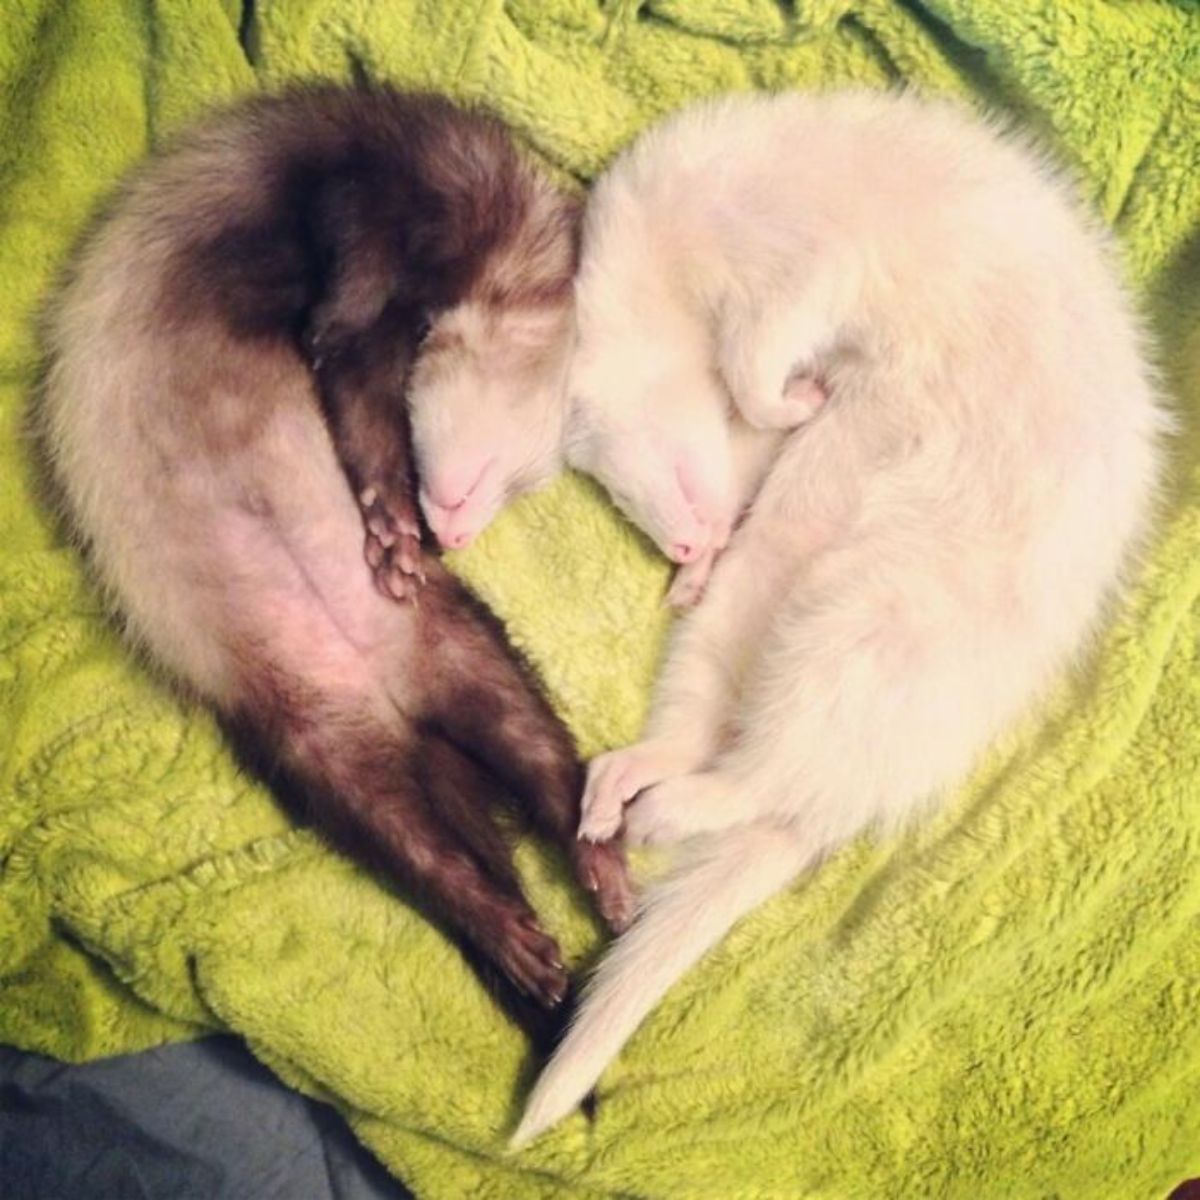 black ferret and white ferret sleeping on green blanket belly up forming a heart shape